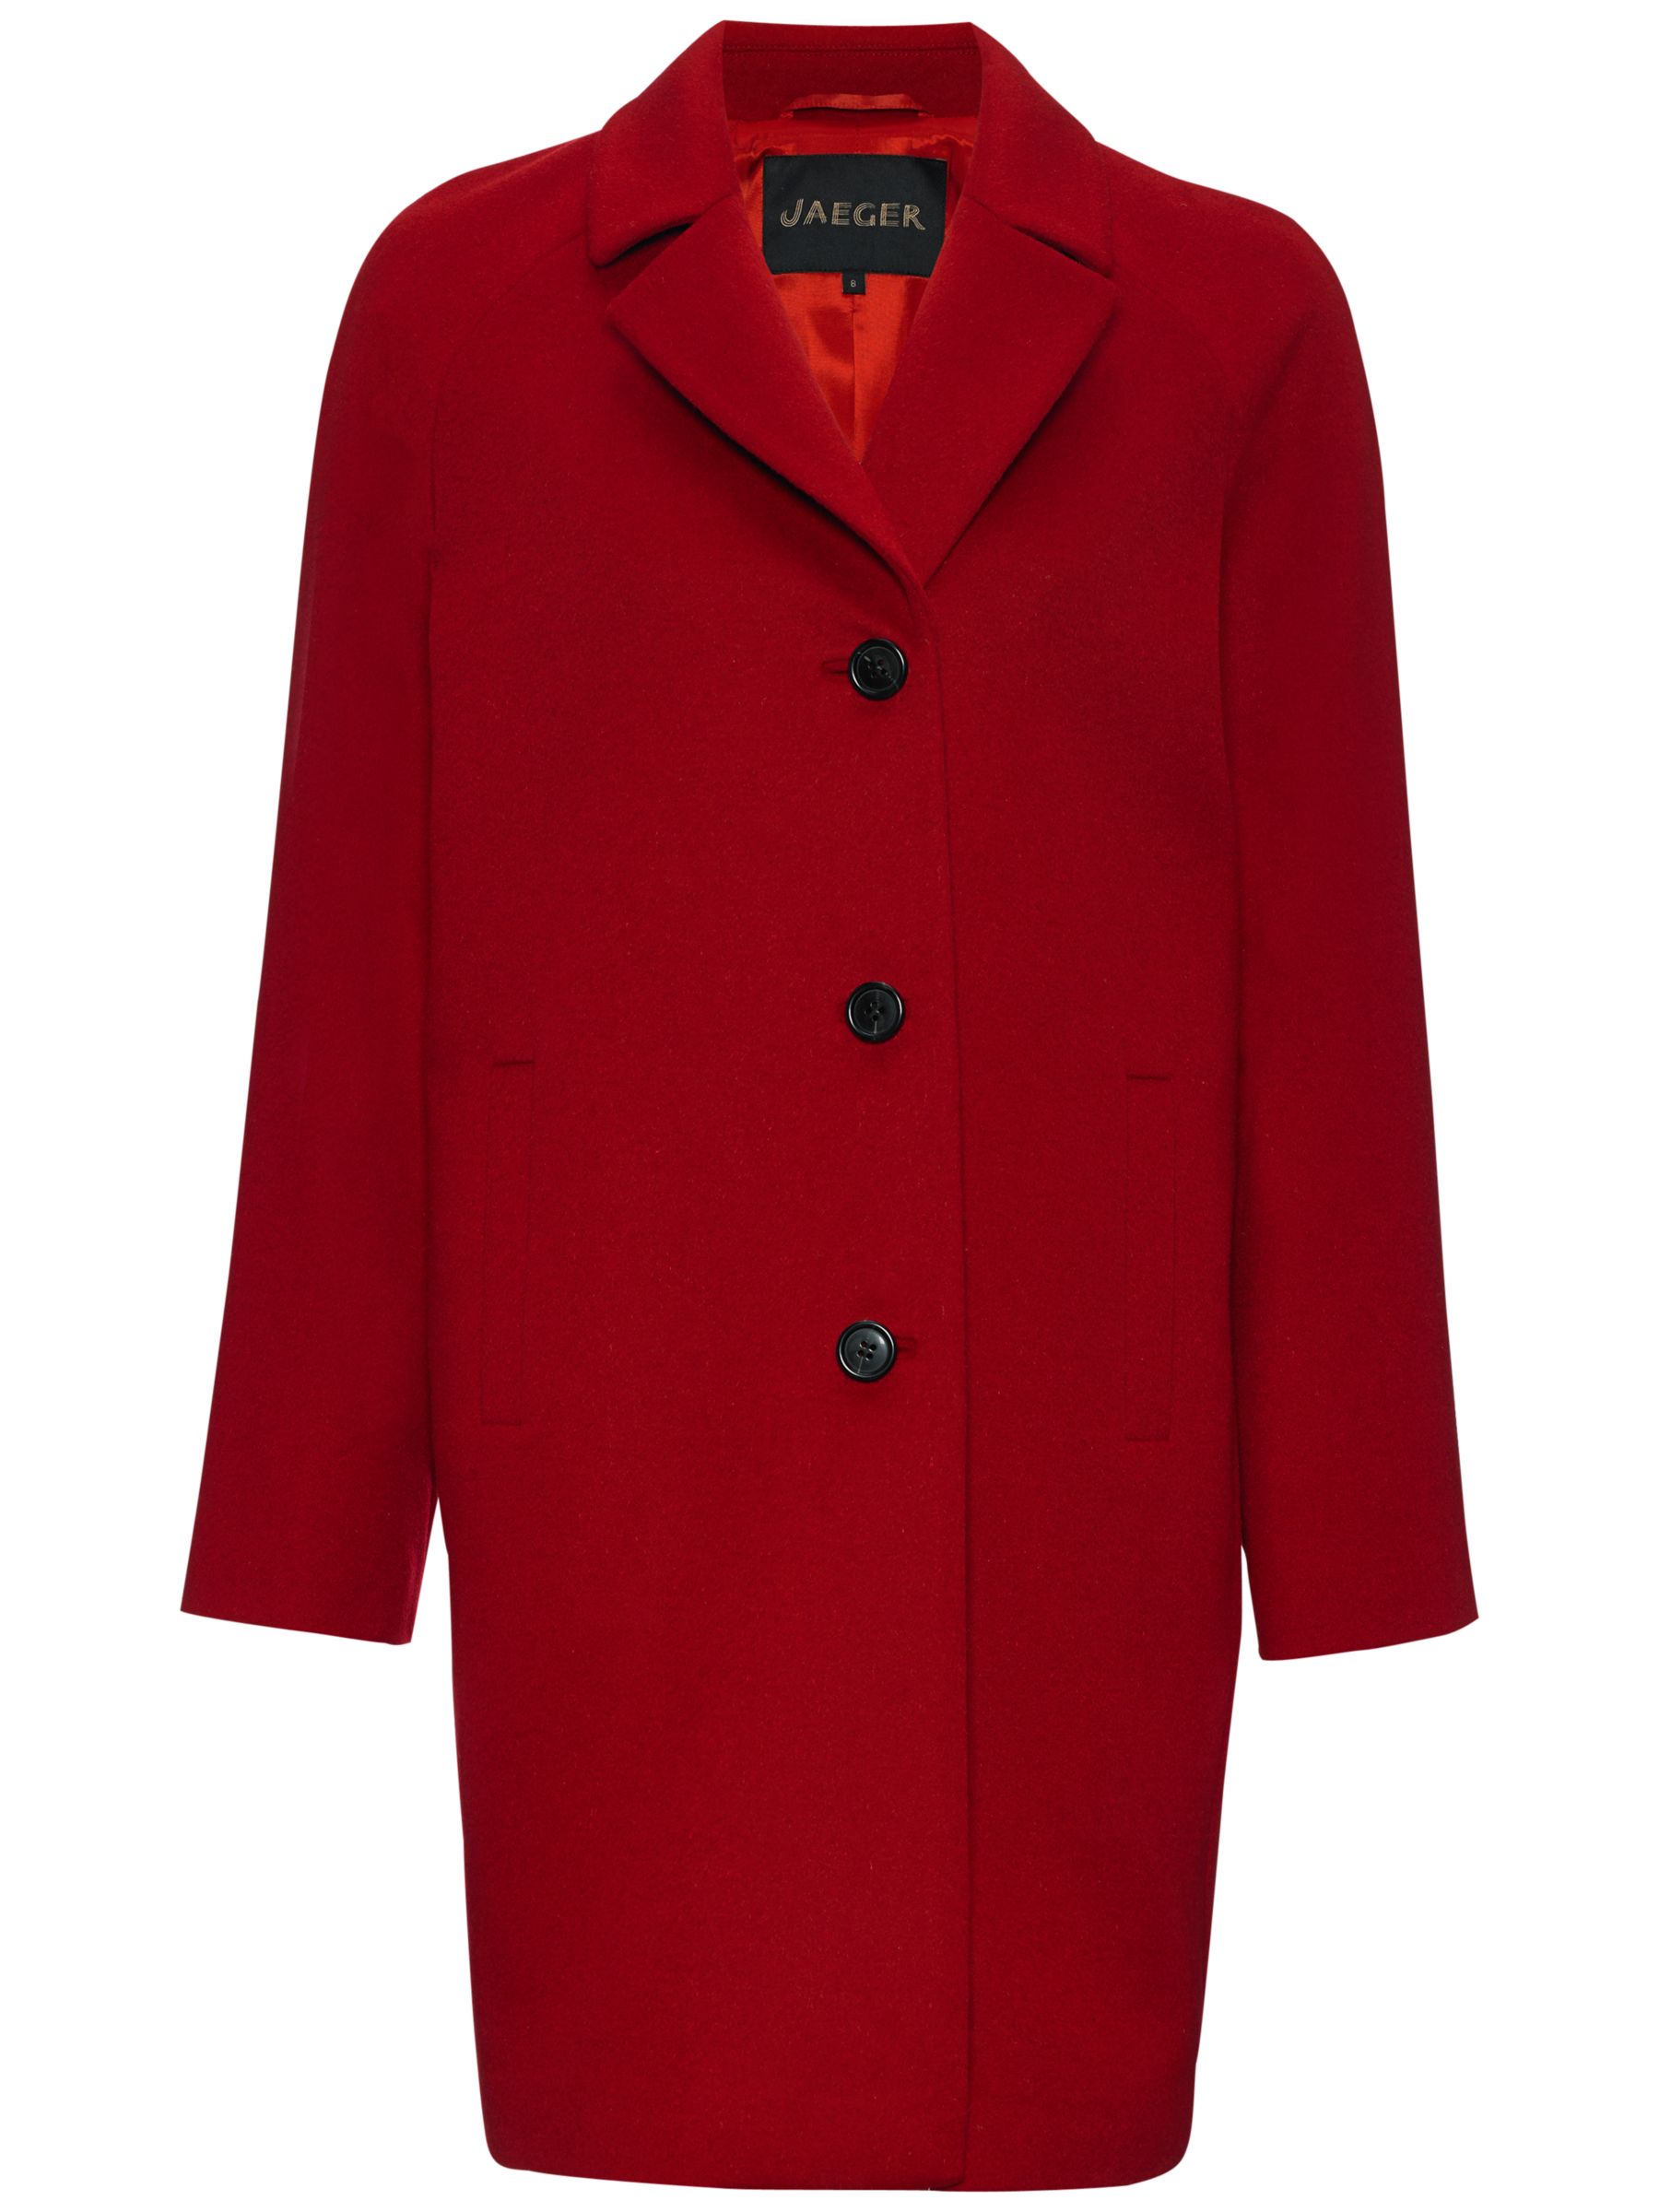 Jaeger Wool Three Button Coat, Red